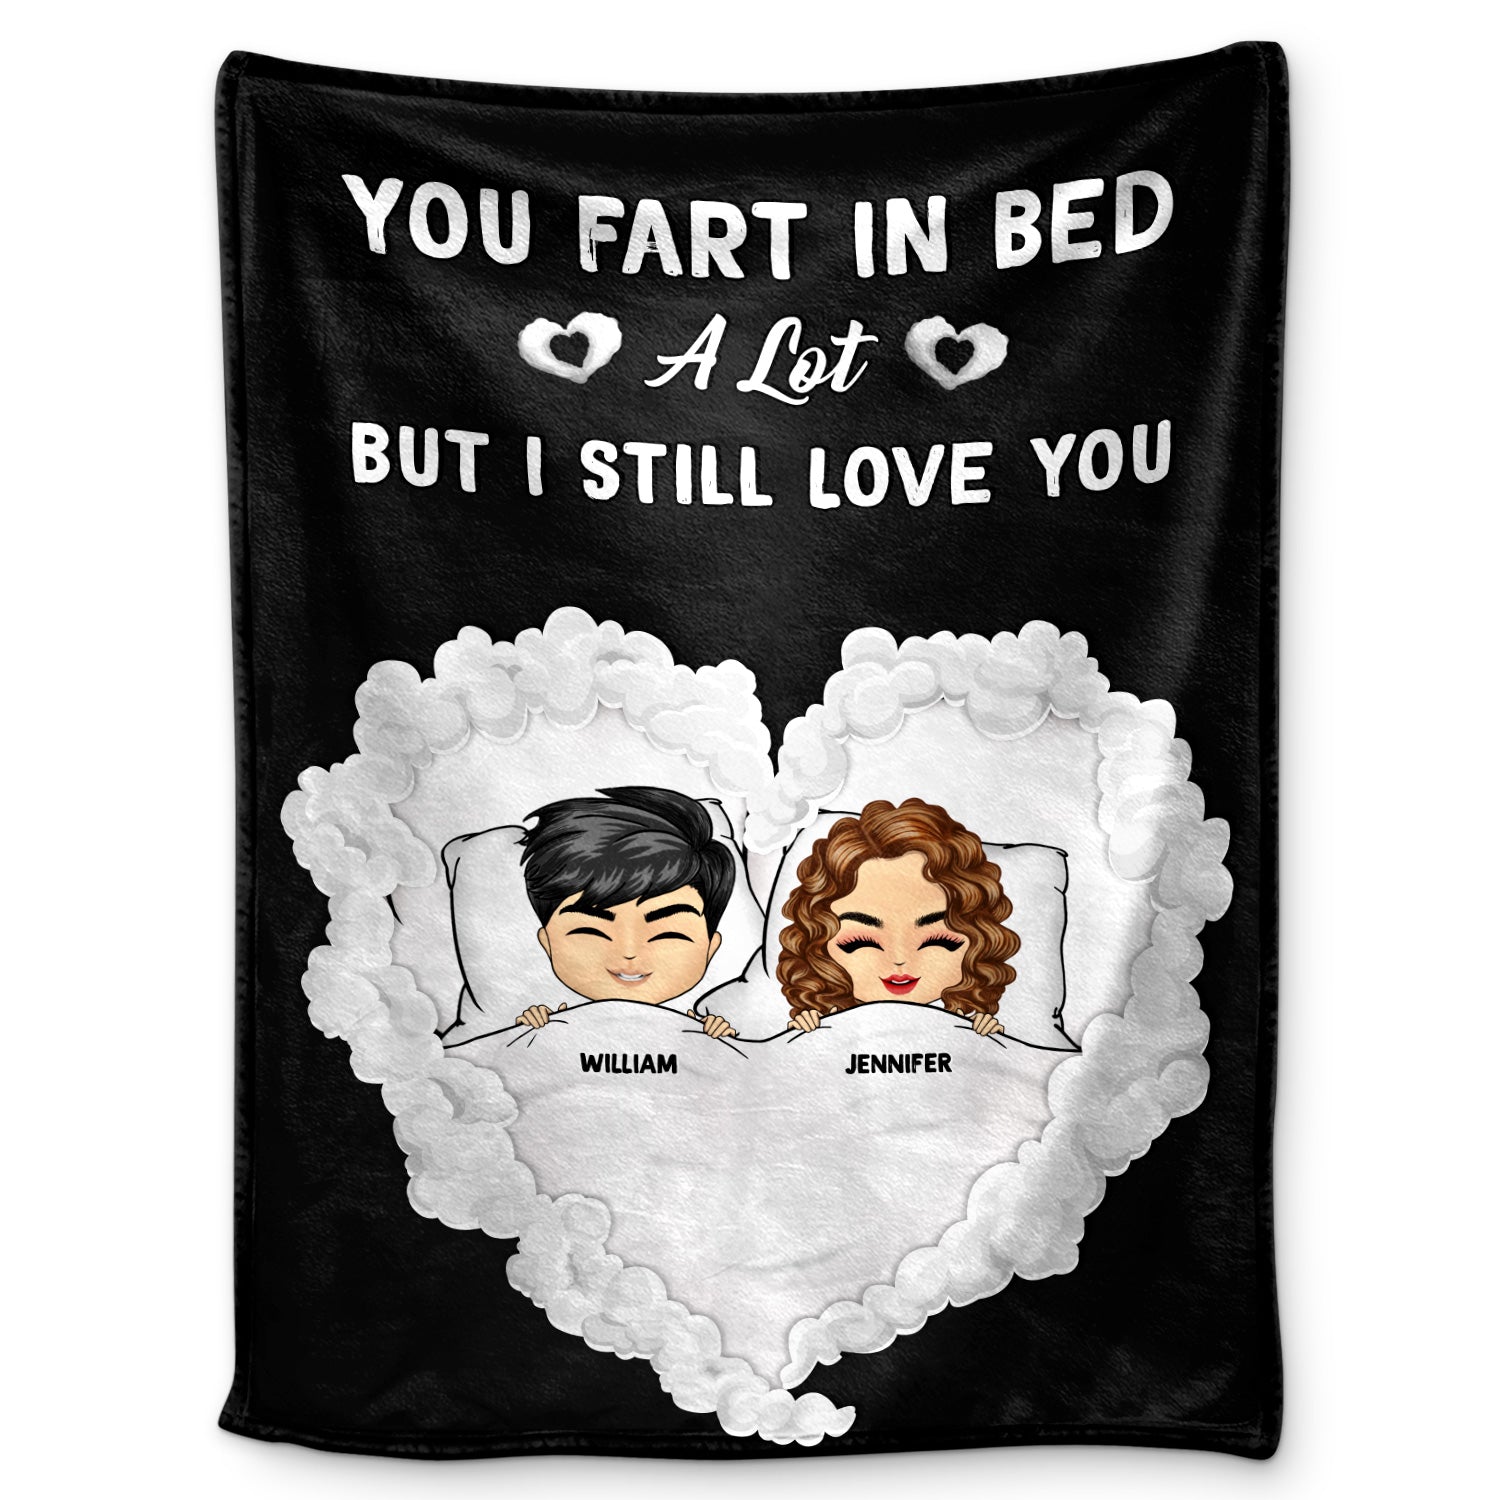 You Fart In Bed - Gift For Couples - Personalized Custom Fleece Blanket